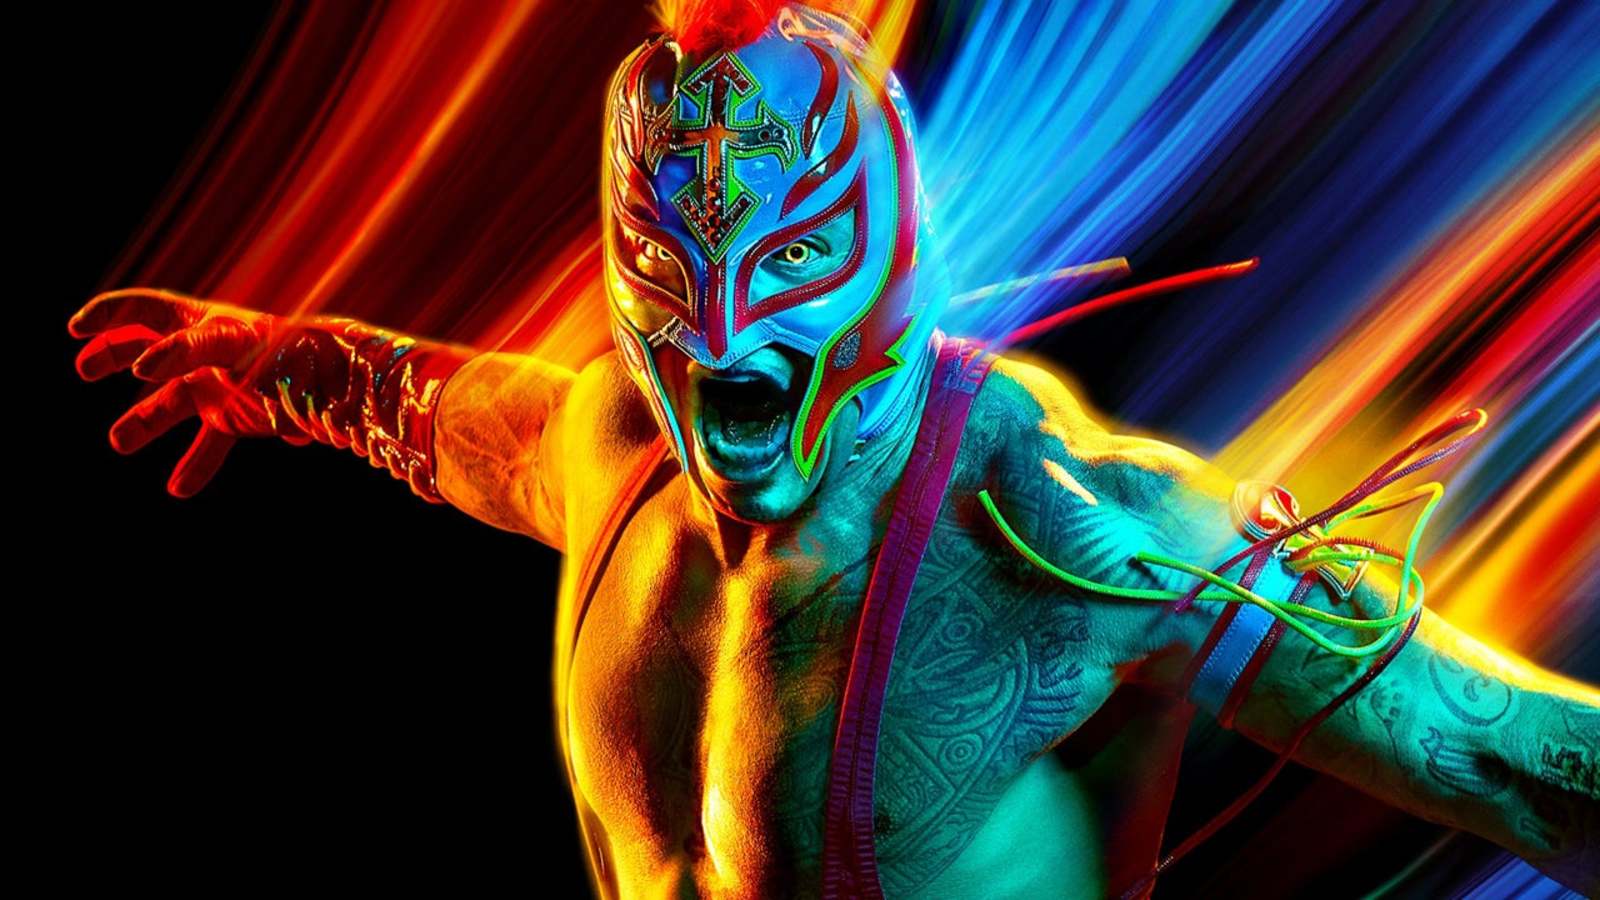 Wwe Returns With 2k22 In March And Rey Mysterio Is On The